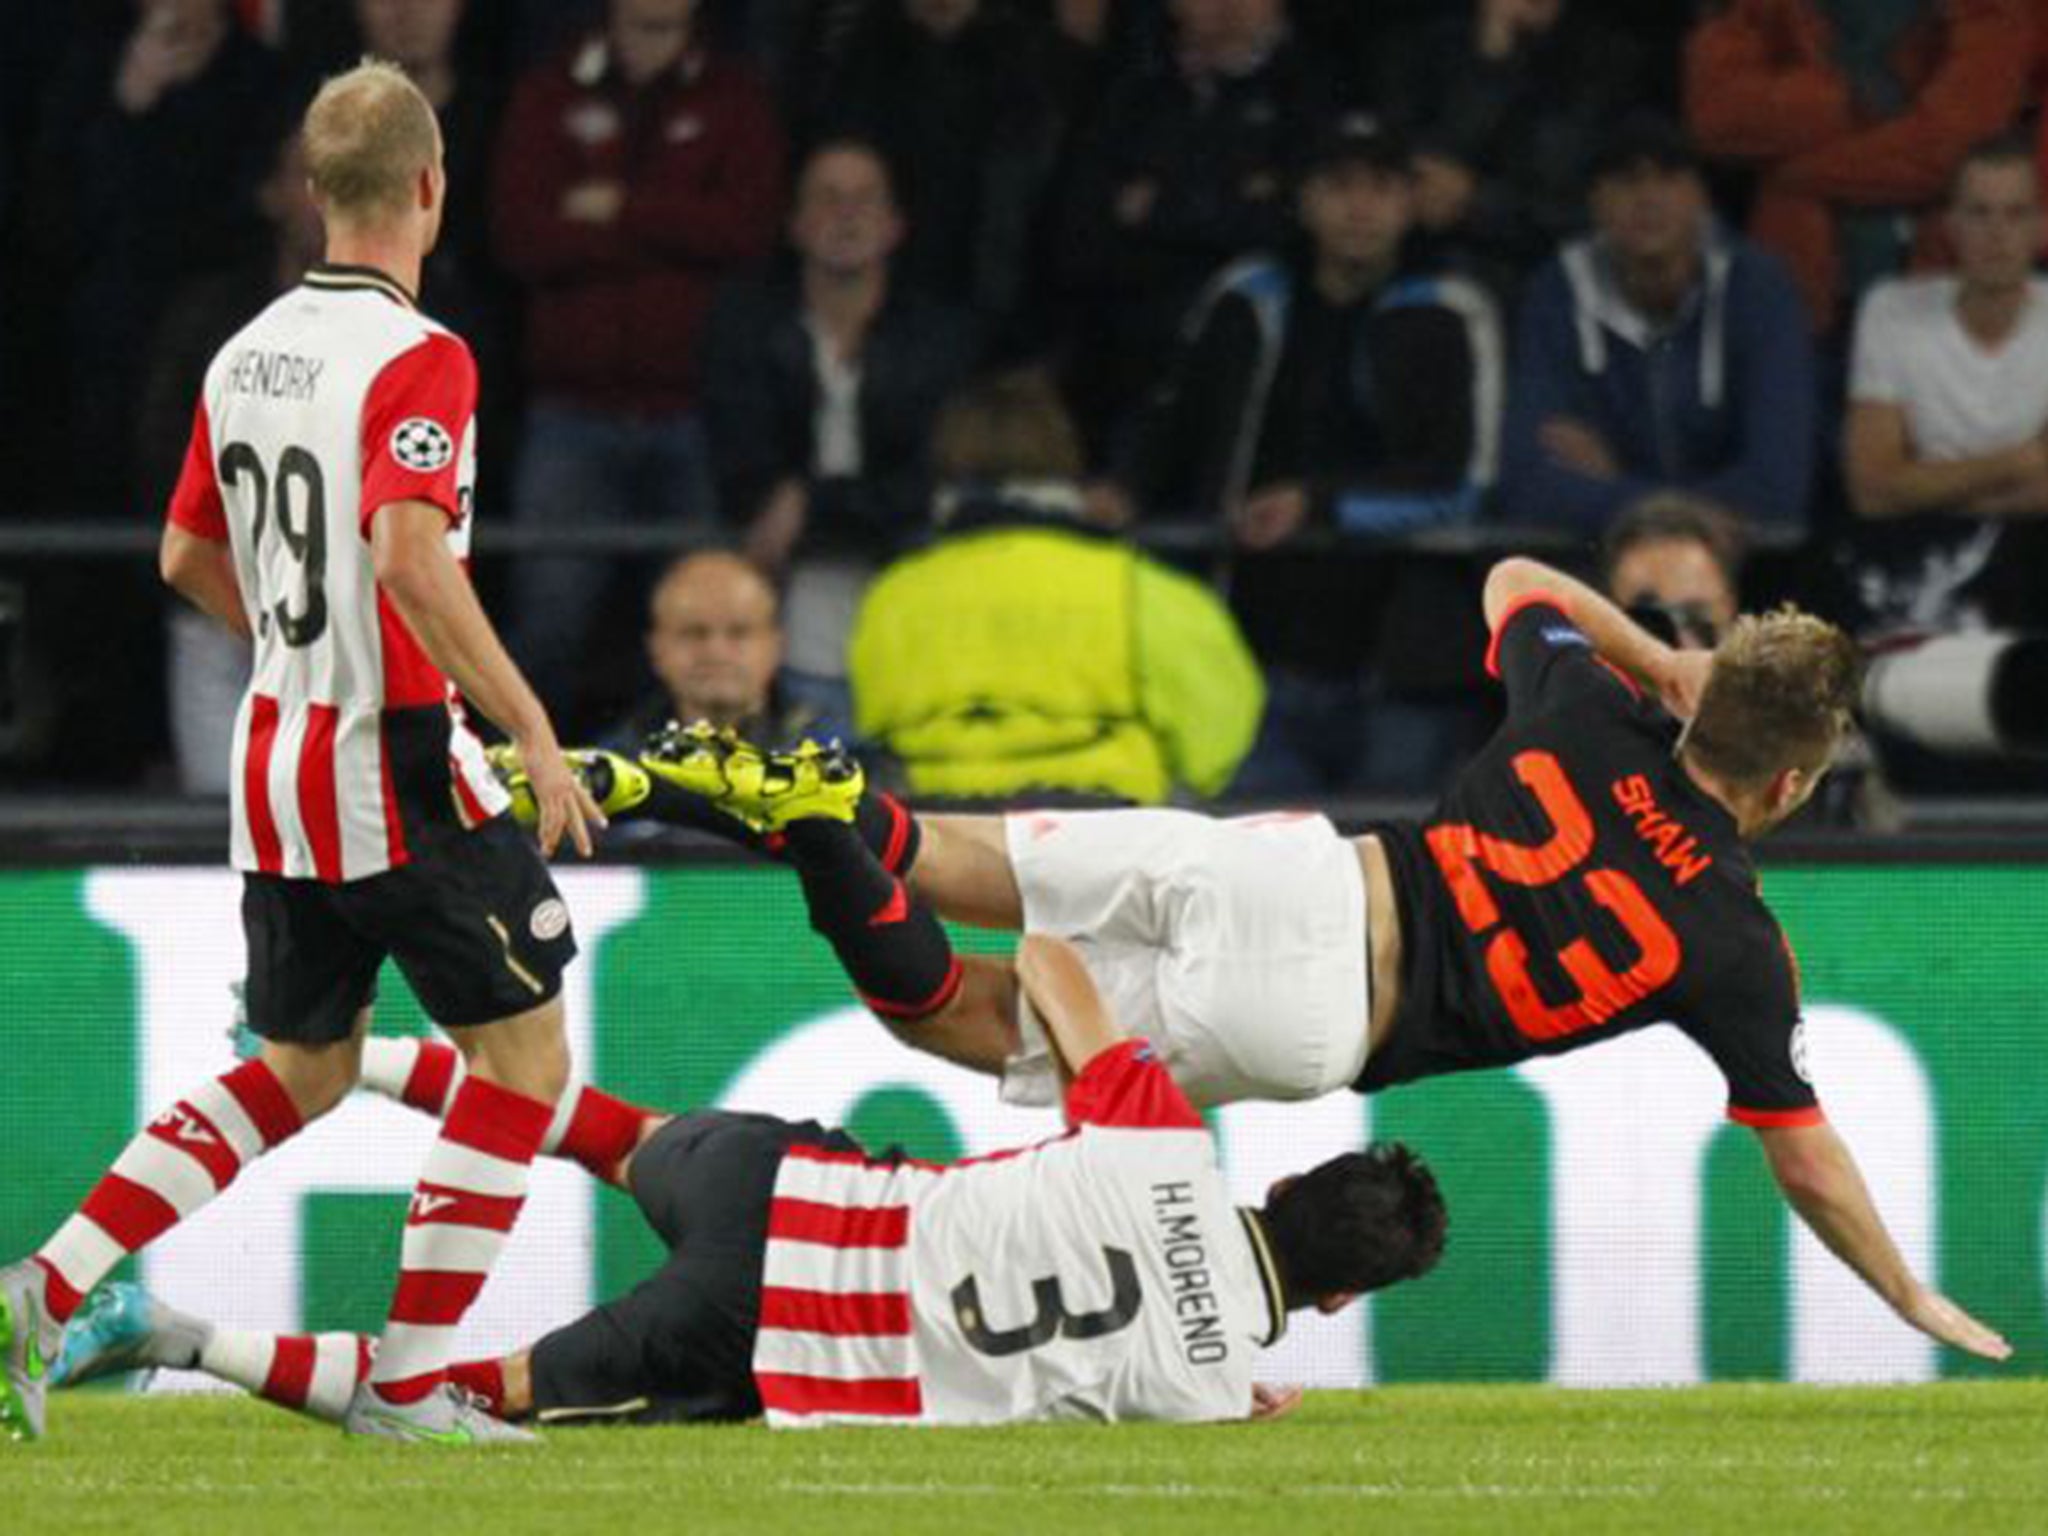 Luke Shaw injury reaction: Shaw tweets he is 'gutted' while Aaron Ramsey and Adnan Januzaj offer ...